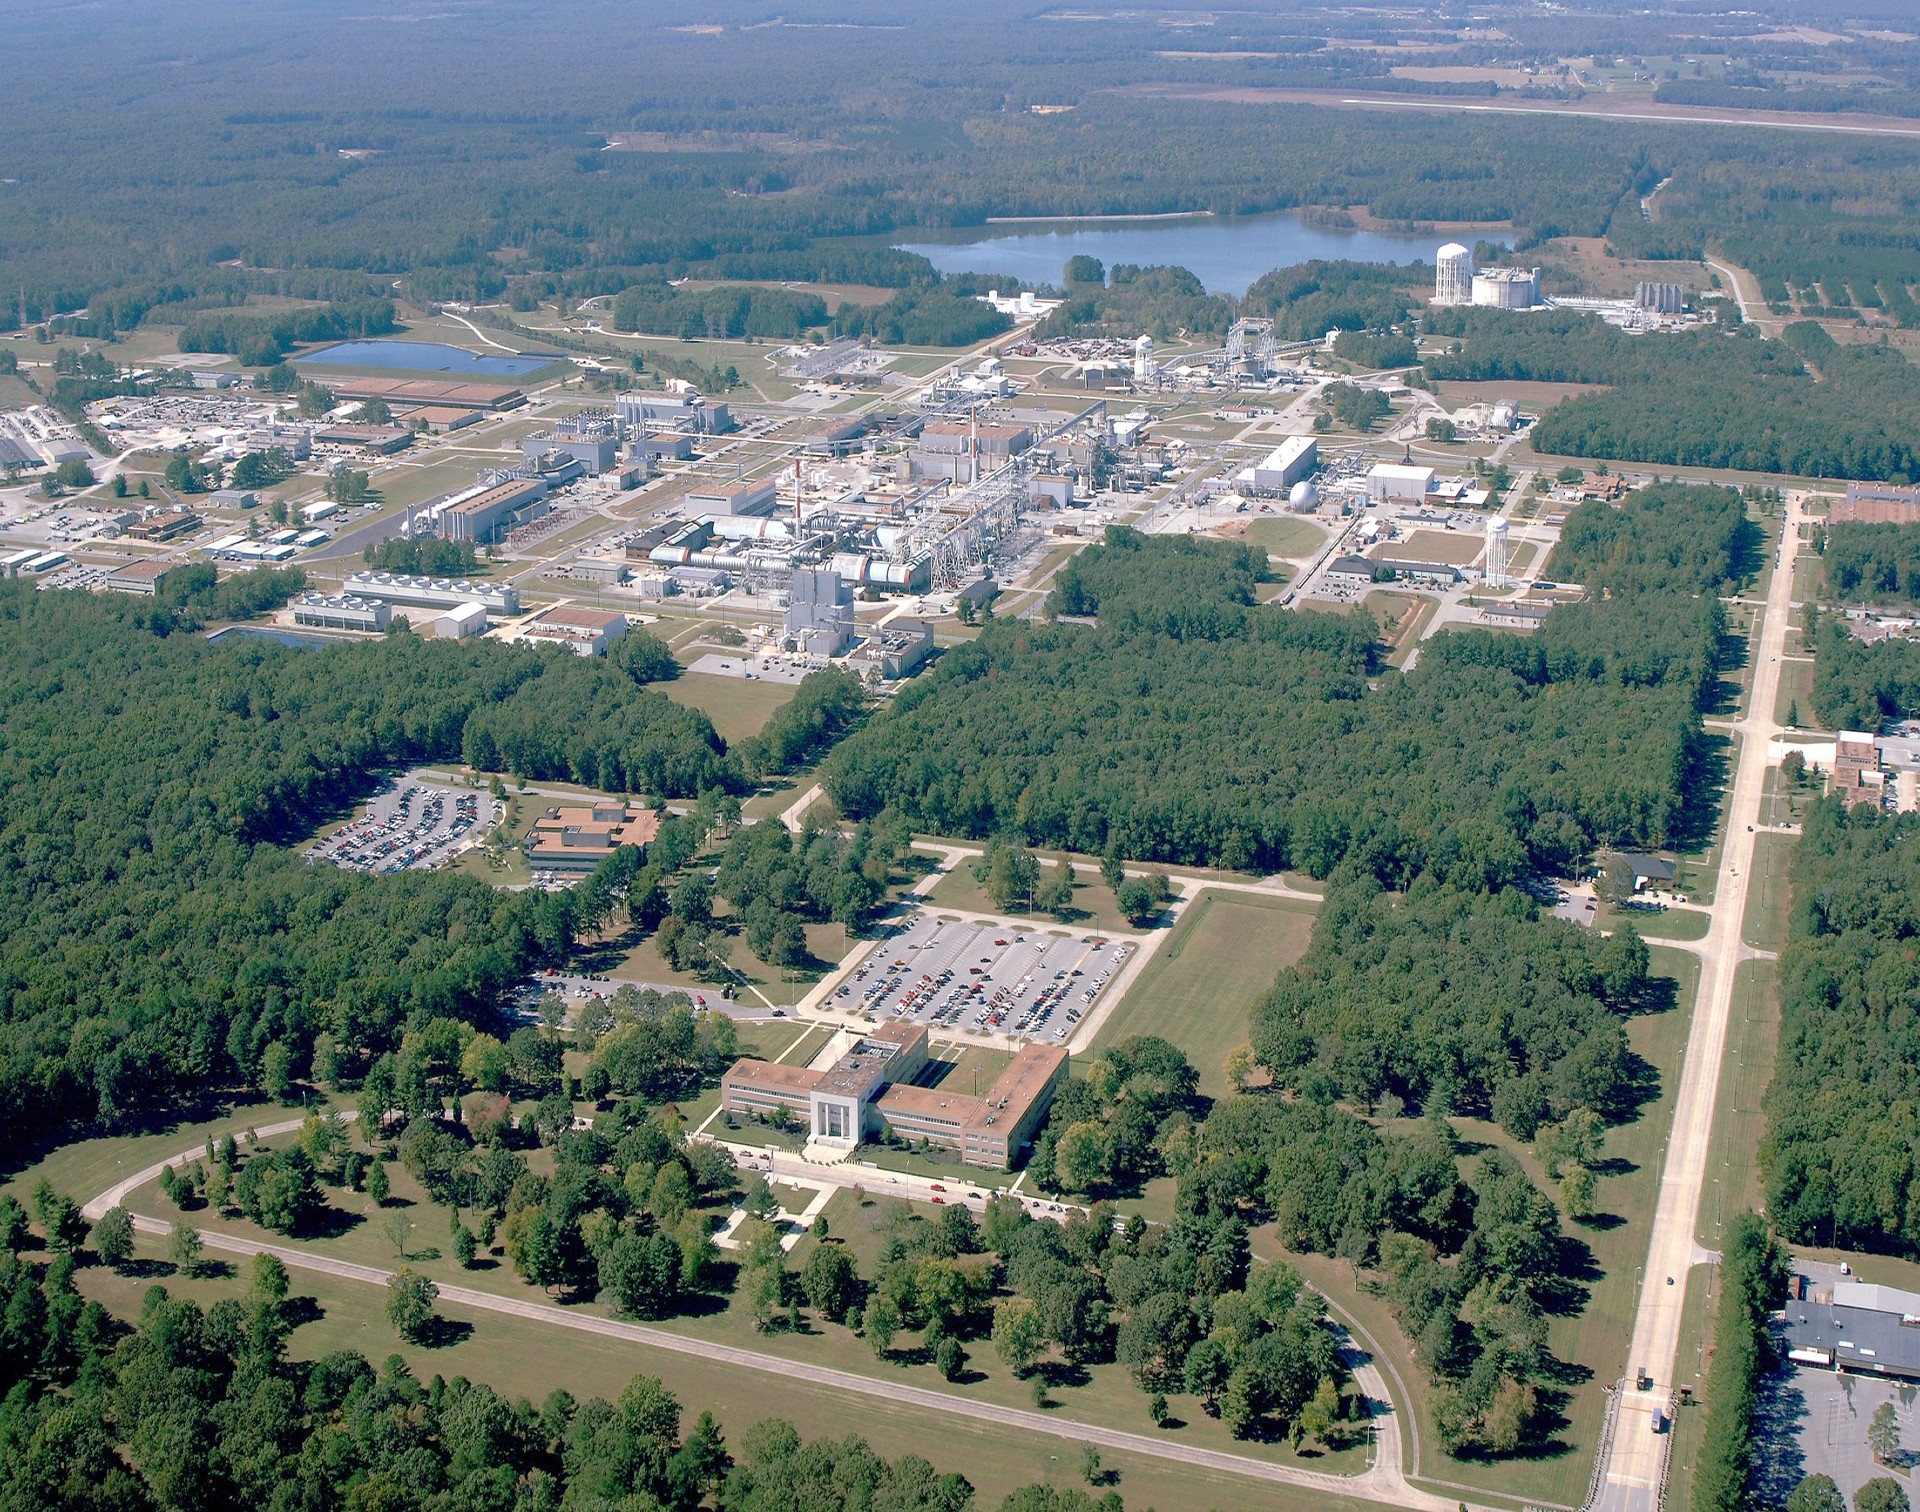 This image is an aerial view of Arnold Air Force Base, Tenn., which is the headquarters for Arnold Engineering Development Complex. The AEDC Test Support Division’s Engineering Section helps maintain an Installation Development Plan, for the long-term development and management of the Department of Defense buildings, land and infrastructure at Arnold AFB.